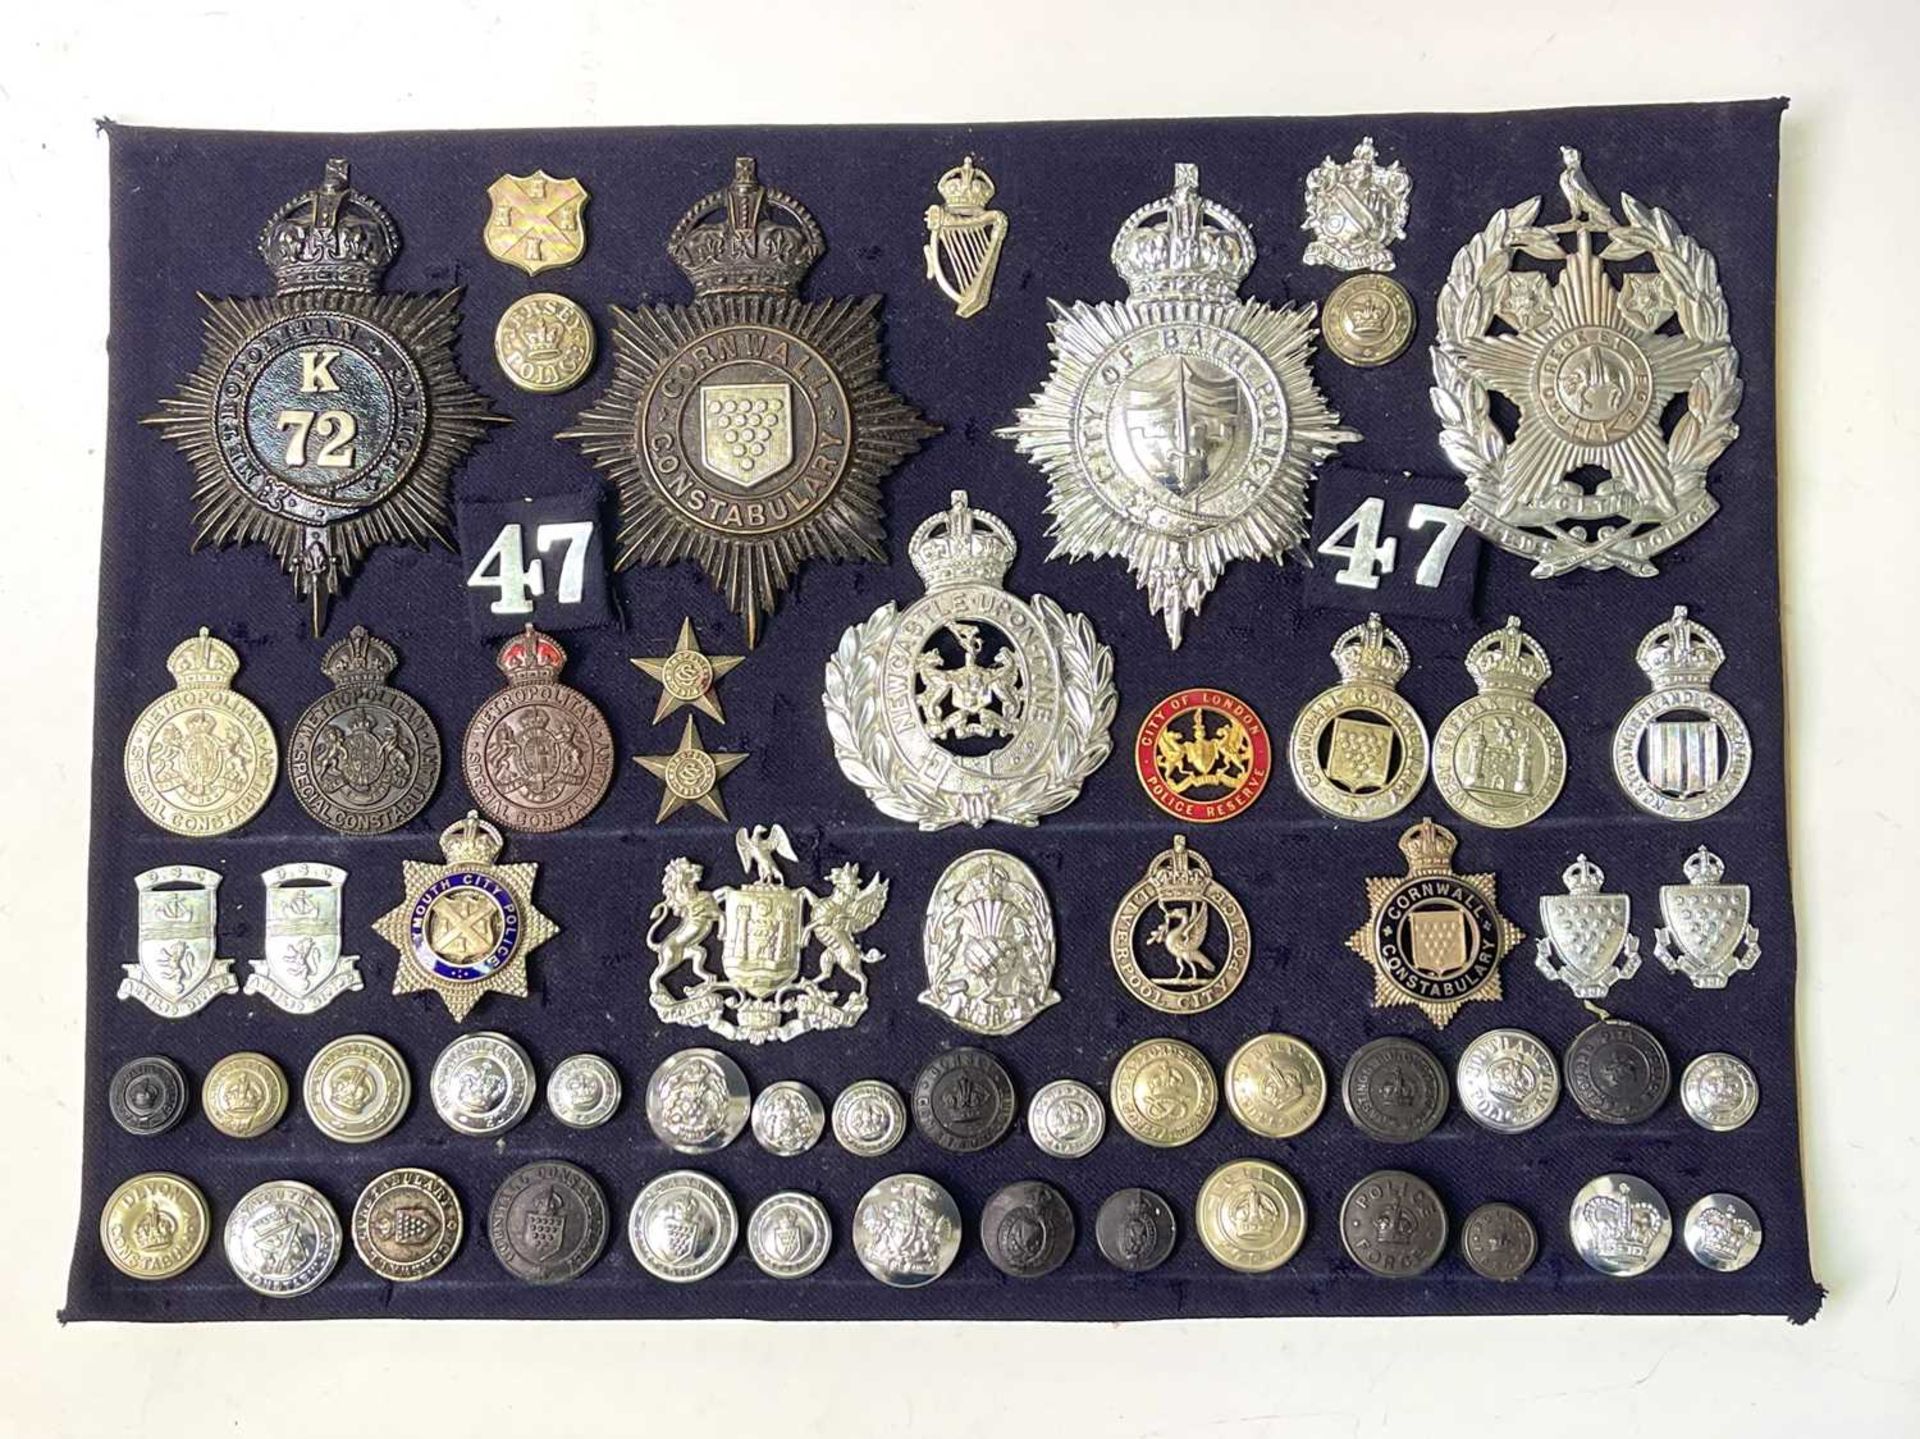 British Police Force Badges. A display card of badges, buttons and collar dogs including helmet